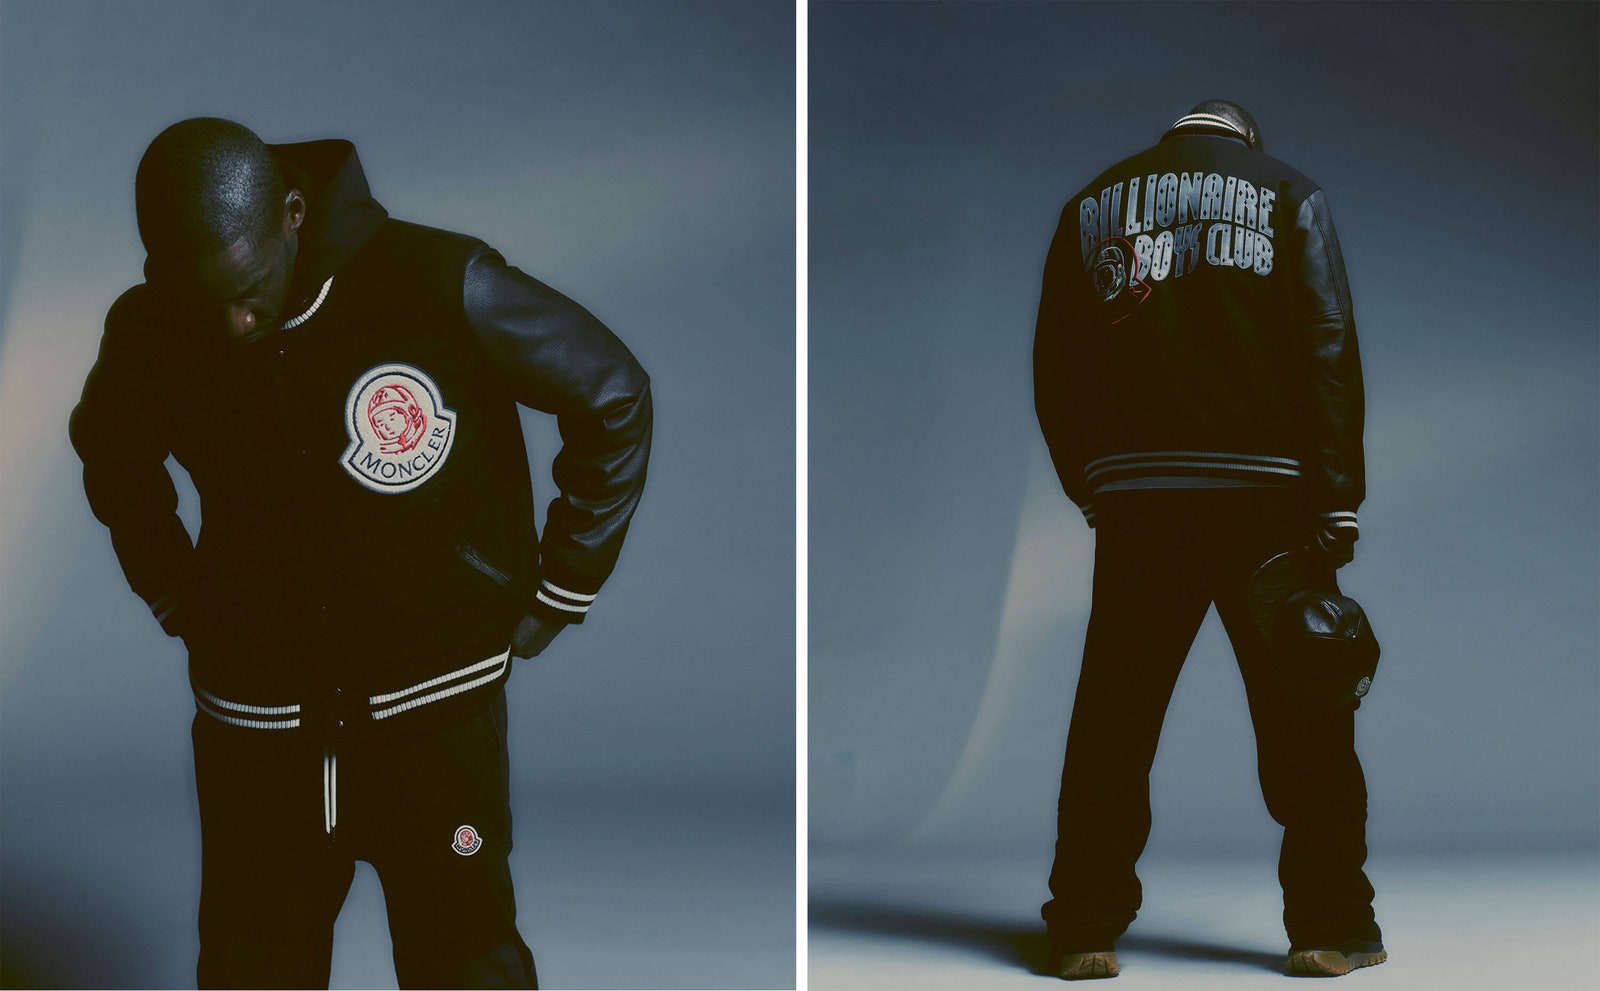 The BBC X Moncler collaboration launched on 15 August.